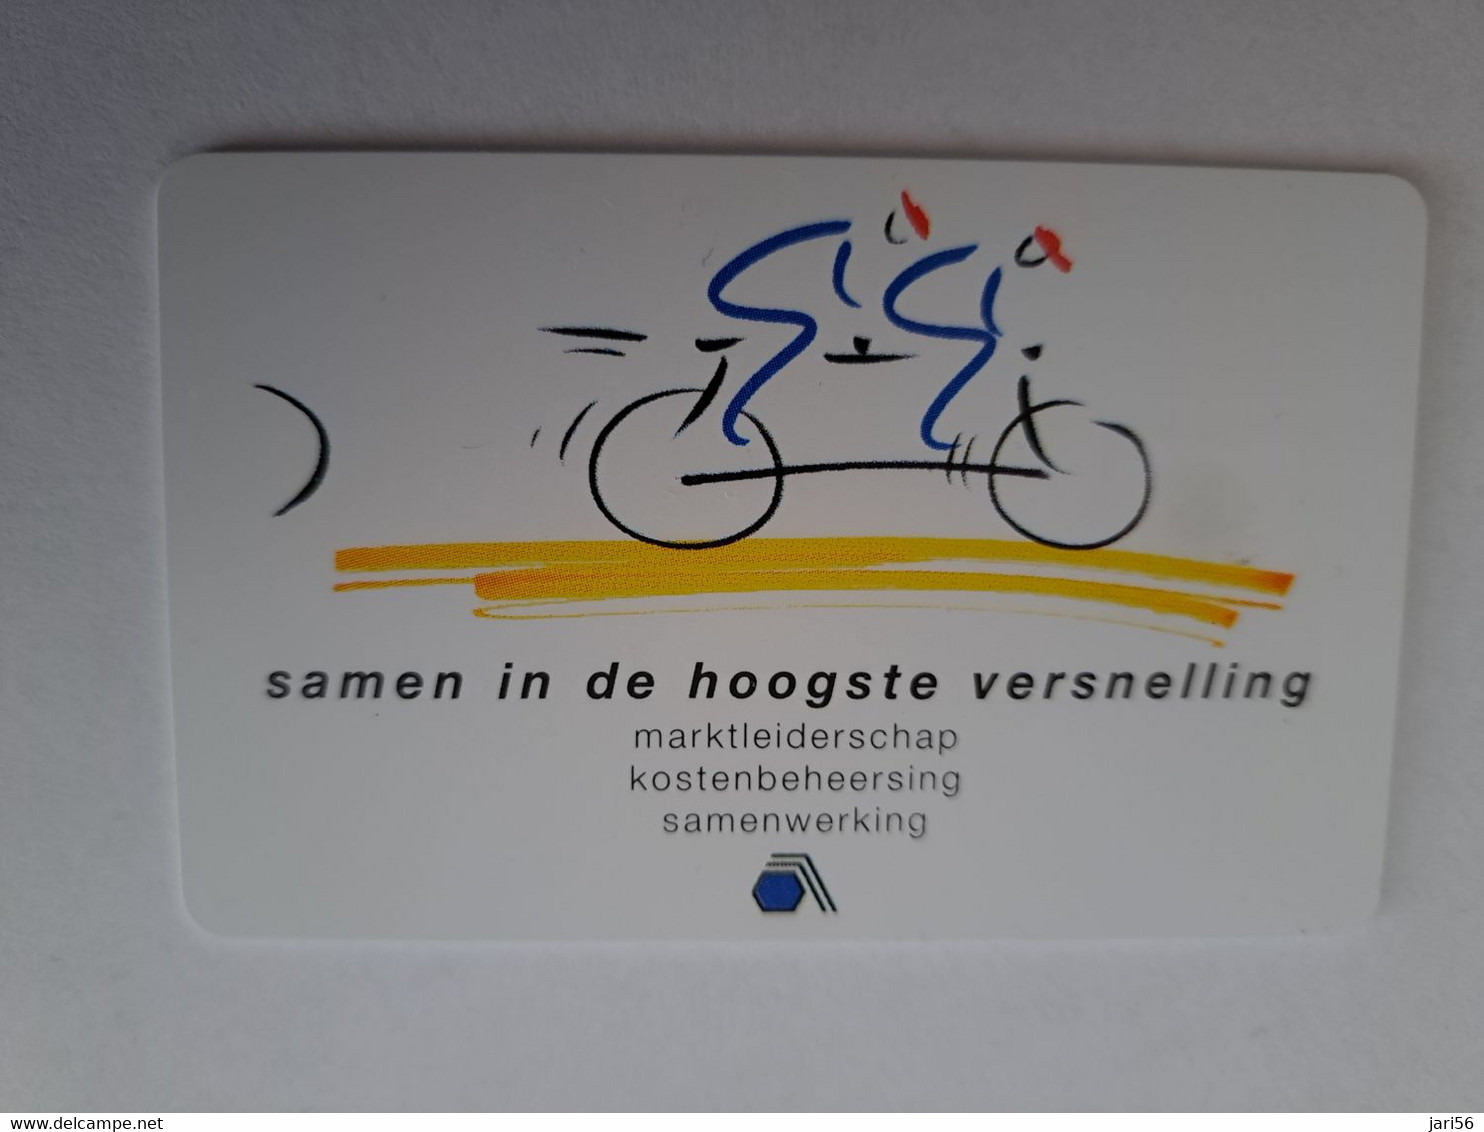 NETHERLANDS  ADVERTISING CHIPCARD  CRE 317 / BICICLE     MINT    ** 12036** - Private